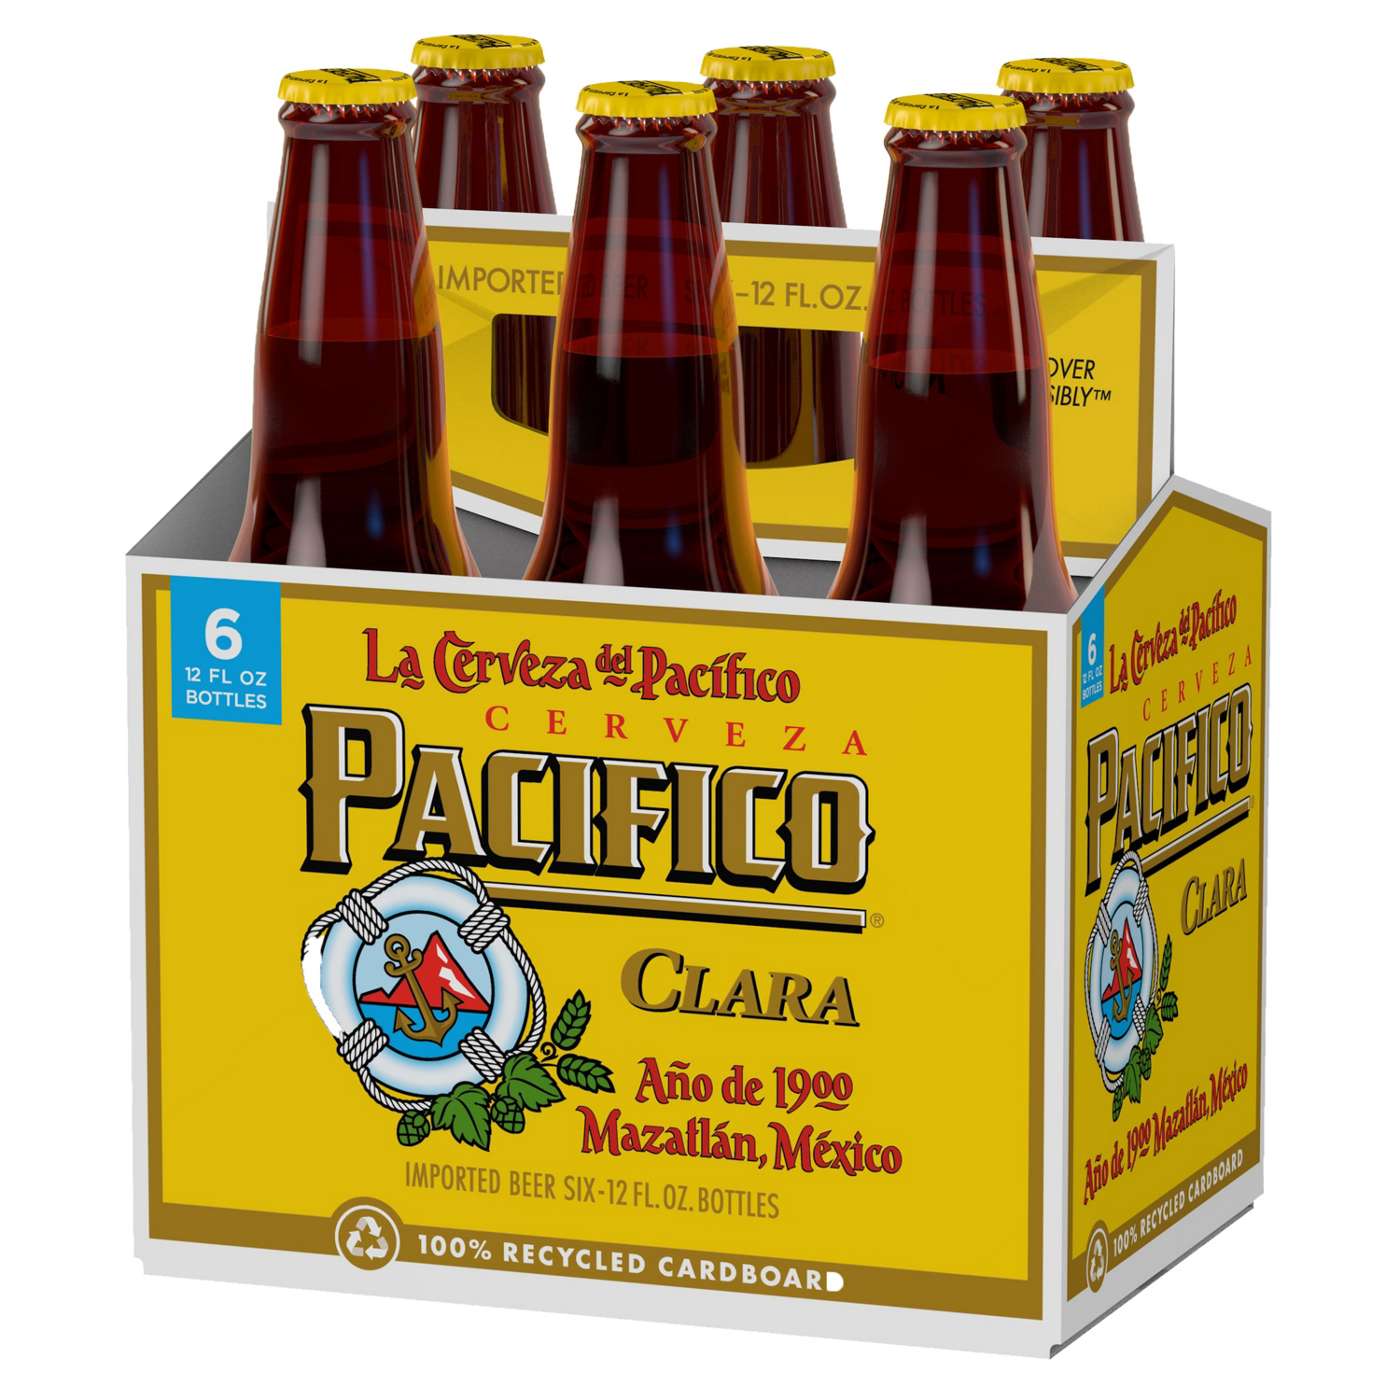 Pacifico Clara Mexican Lager Import Beer 12 oz Bottles, 6 pk; image 4 of 10